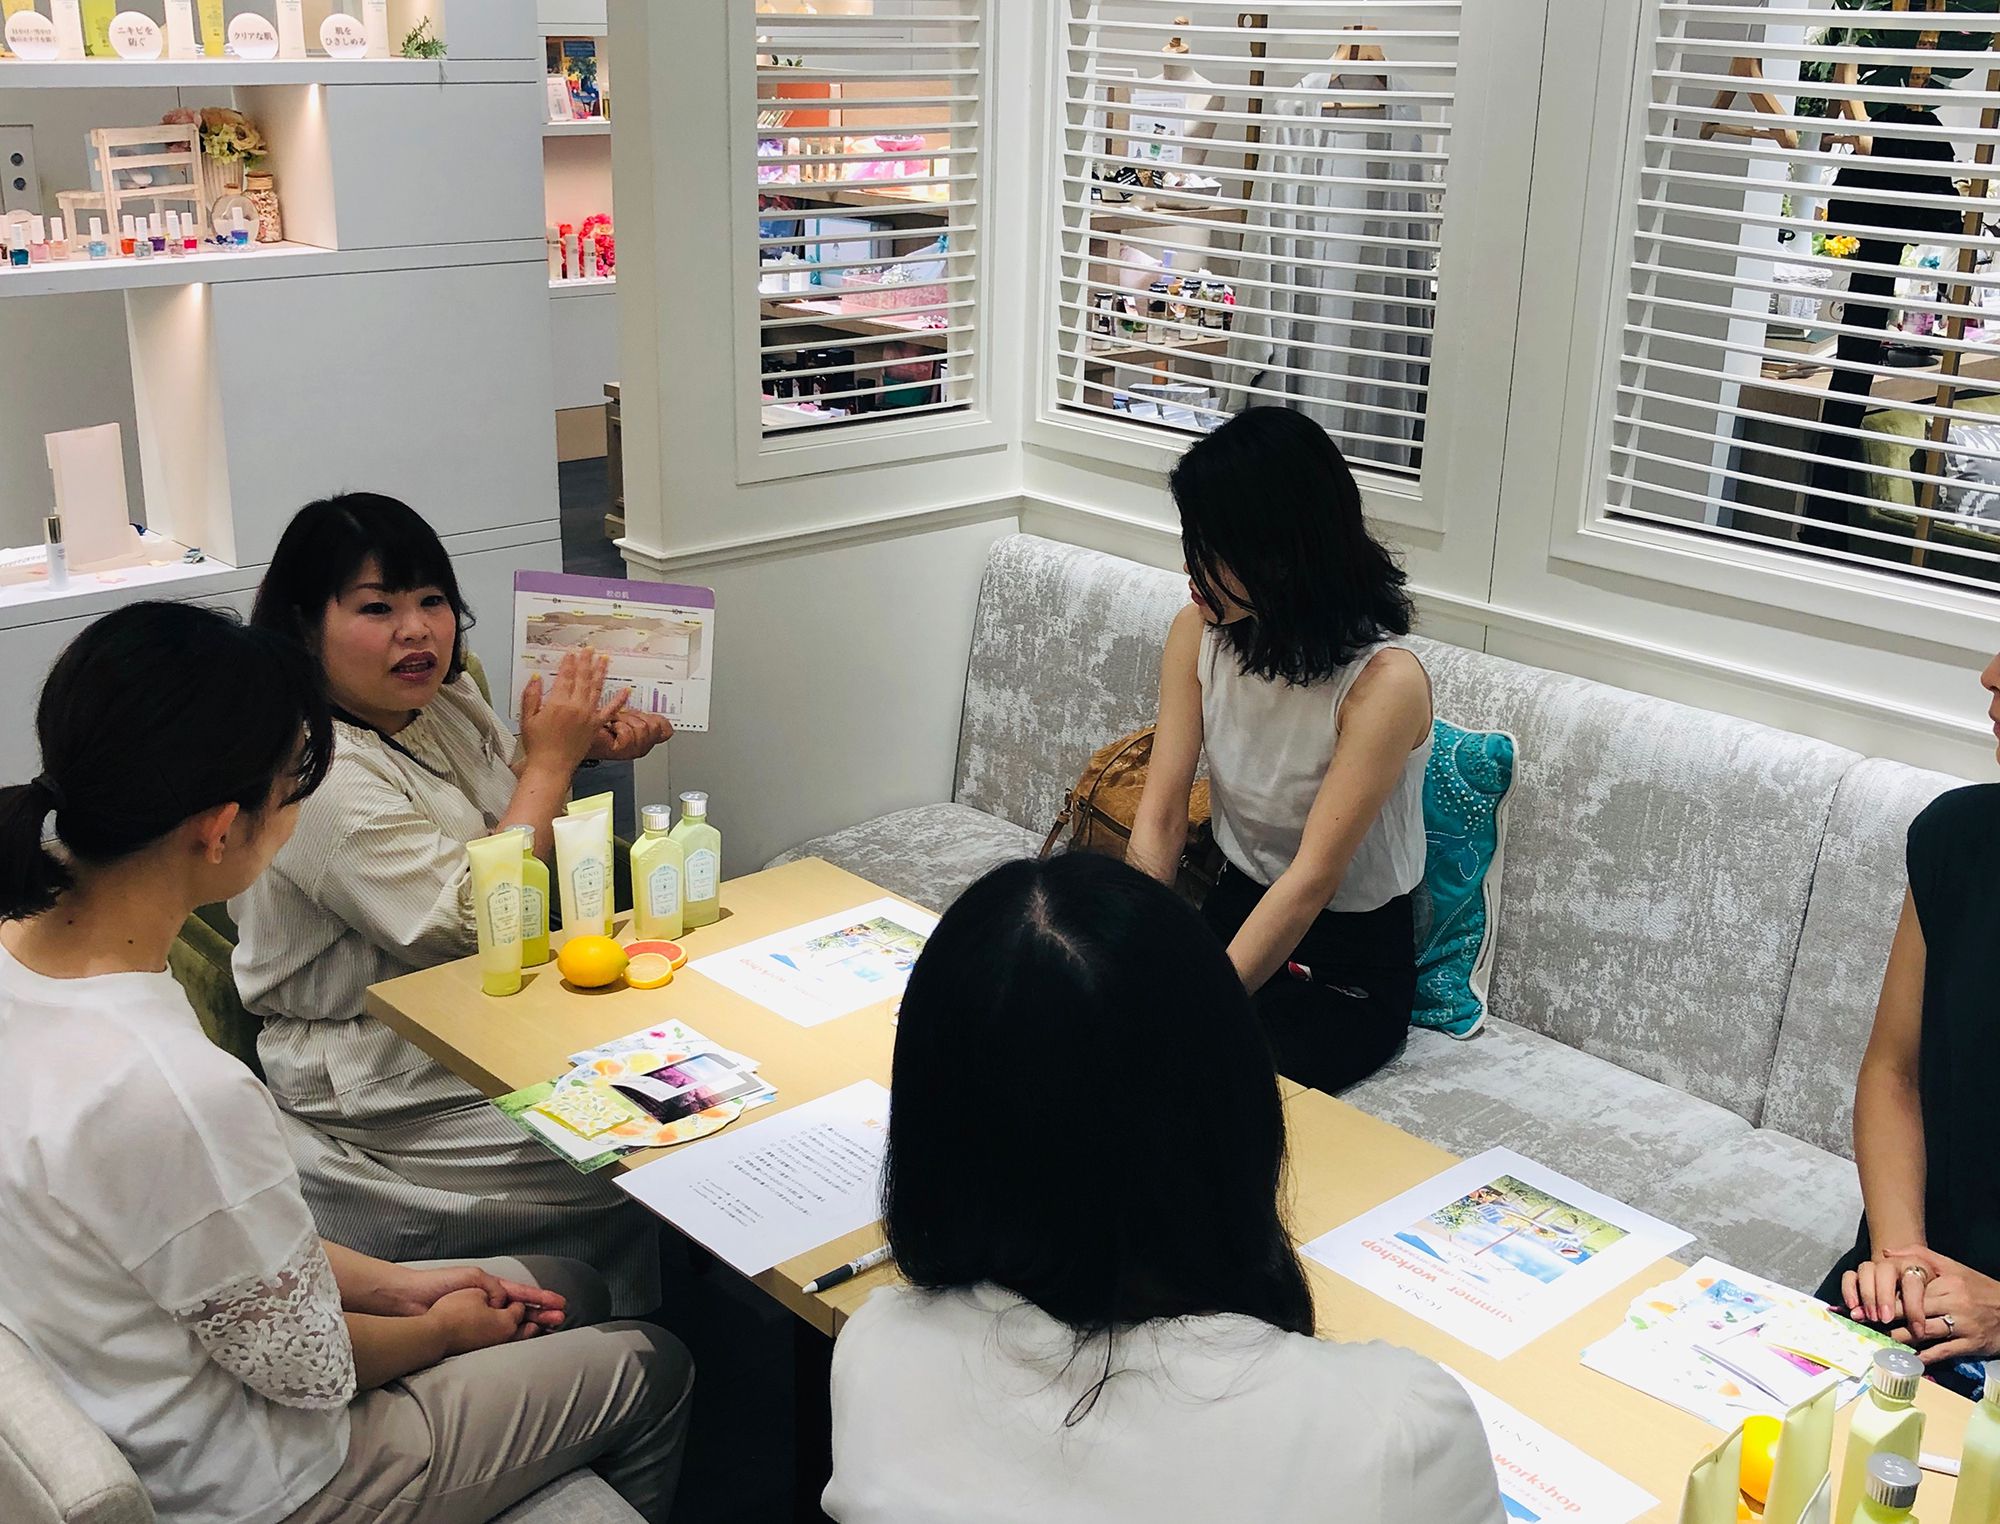 The workshops are held irregularly and focus on mainly beauty and themes related to enriching daily life. The workshop schedule can be found at their official website and store.